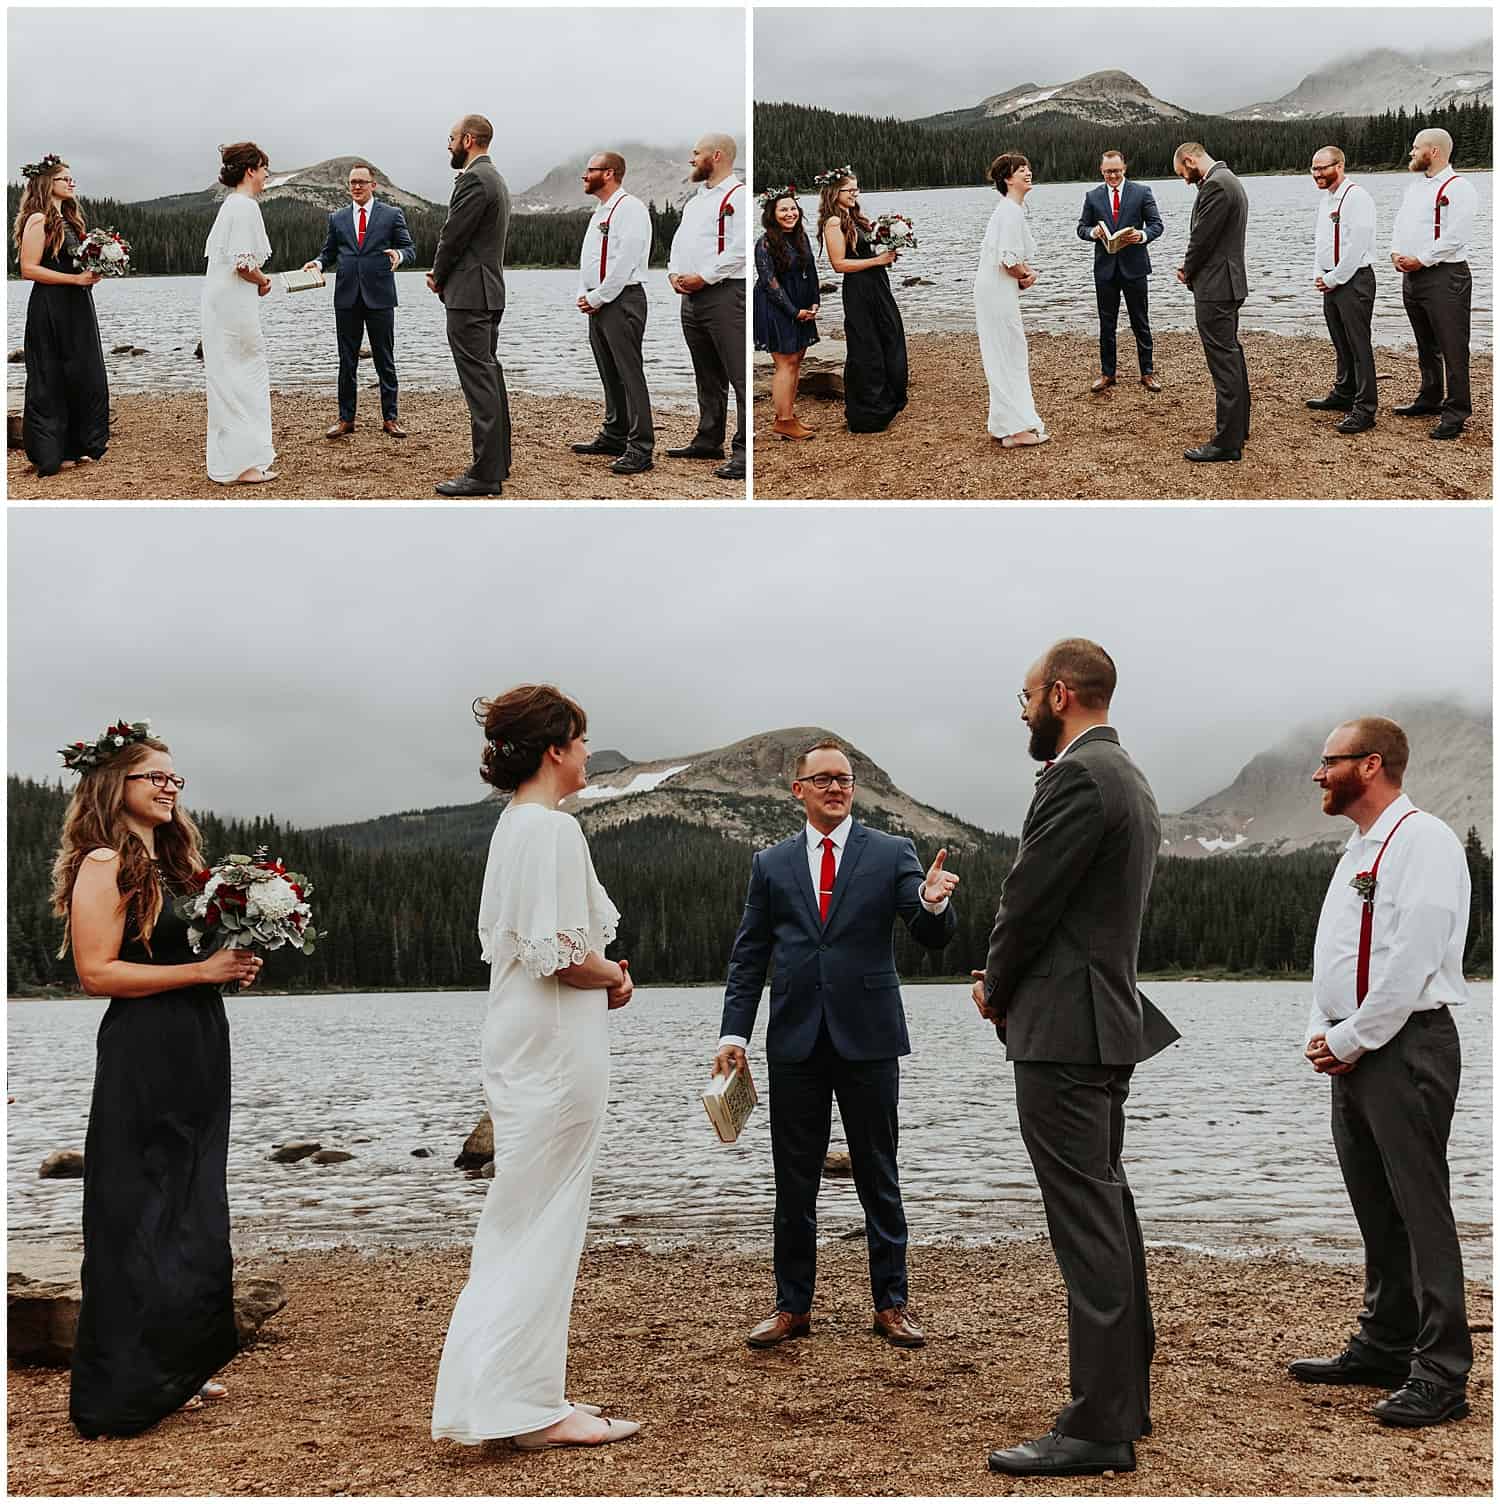 couple getting married next to lake in the mountains